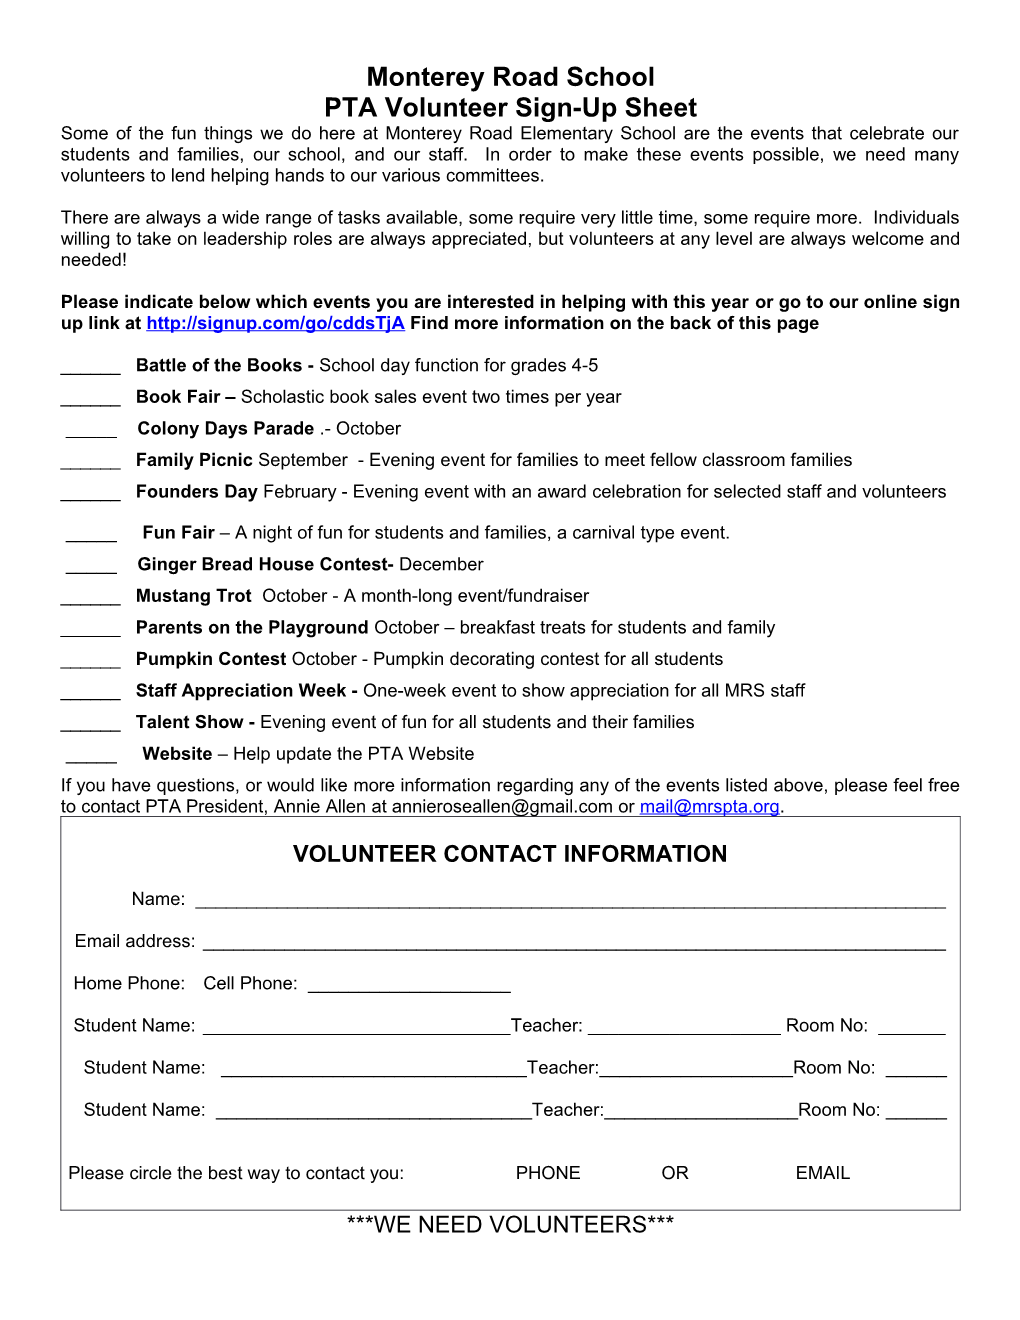 Monterey Road School Event Committee and Room Representative Sign-Up Sheet